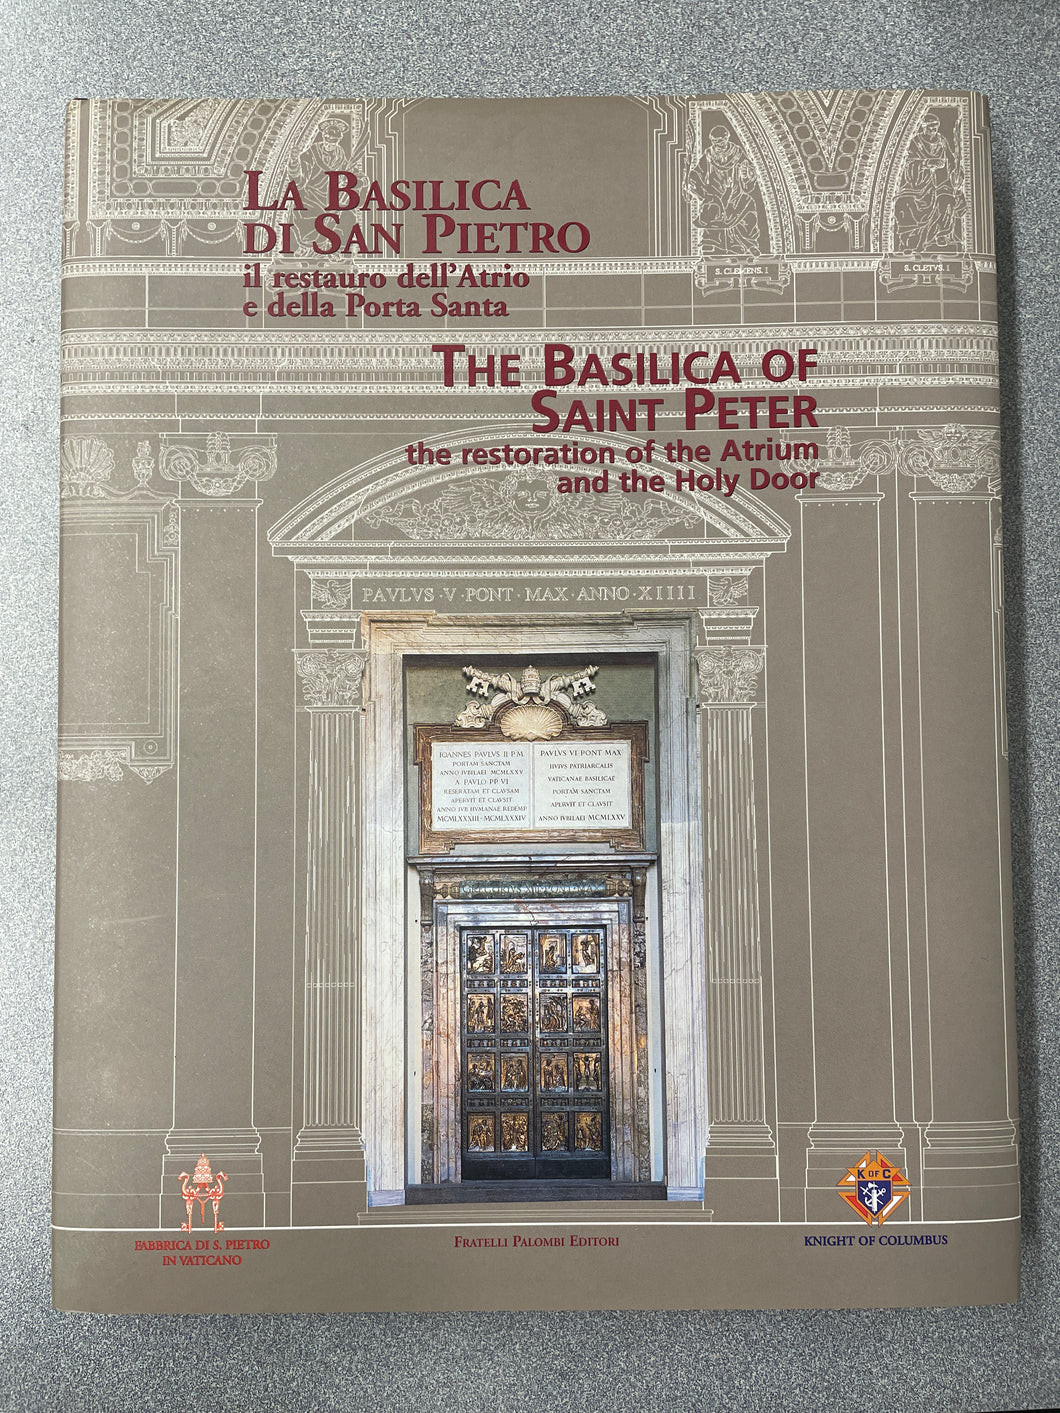 The Basilica of Saint Peter: The Restoration of the Atrium and the Holy Door, Palombi, Fratelli, ed. [1999] A 4/24